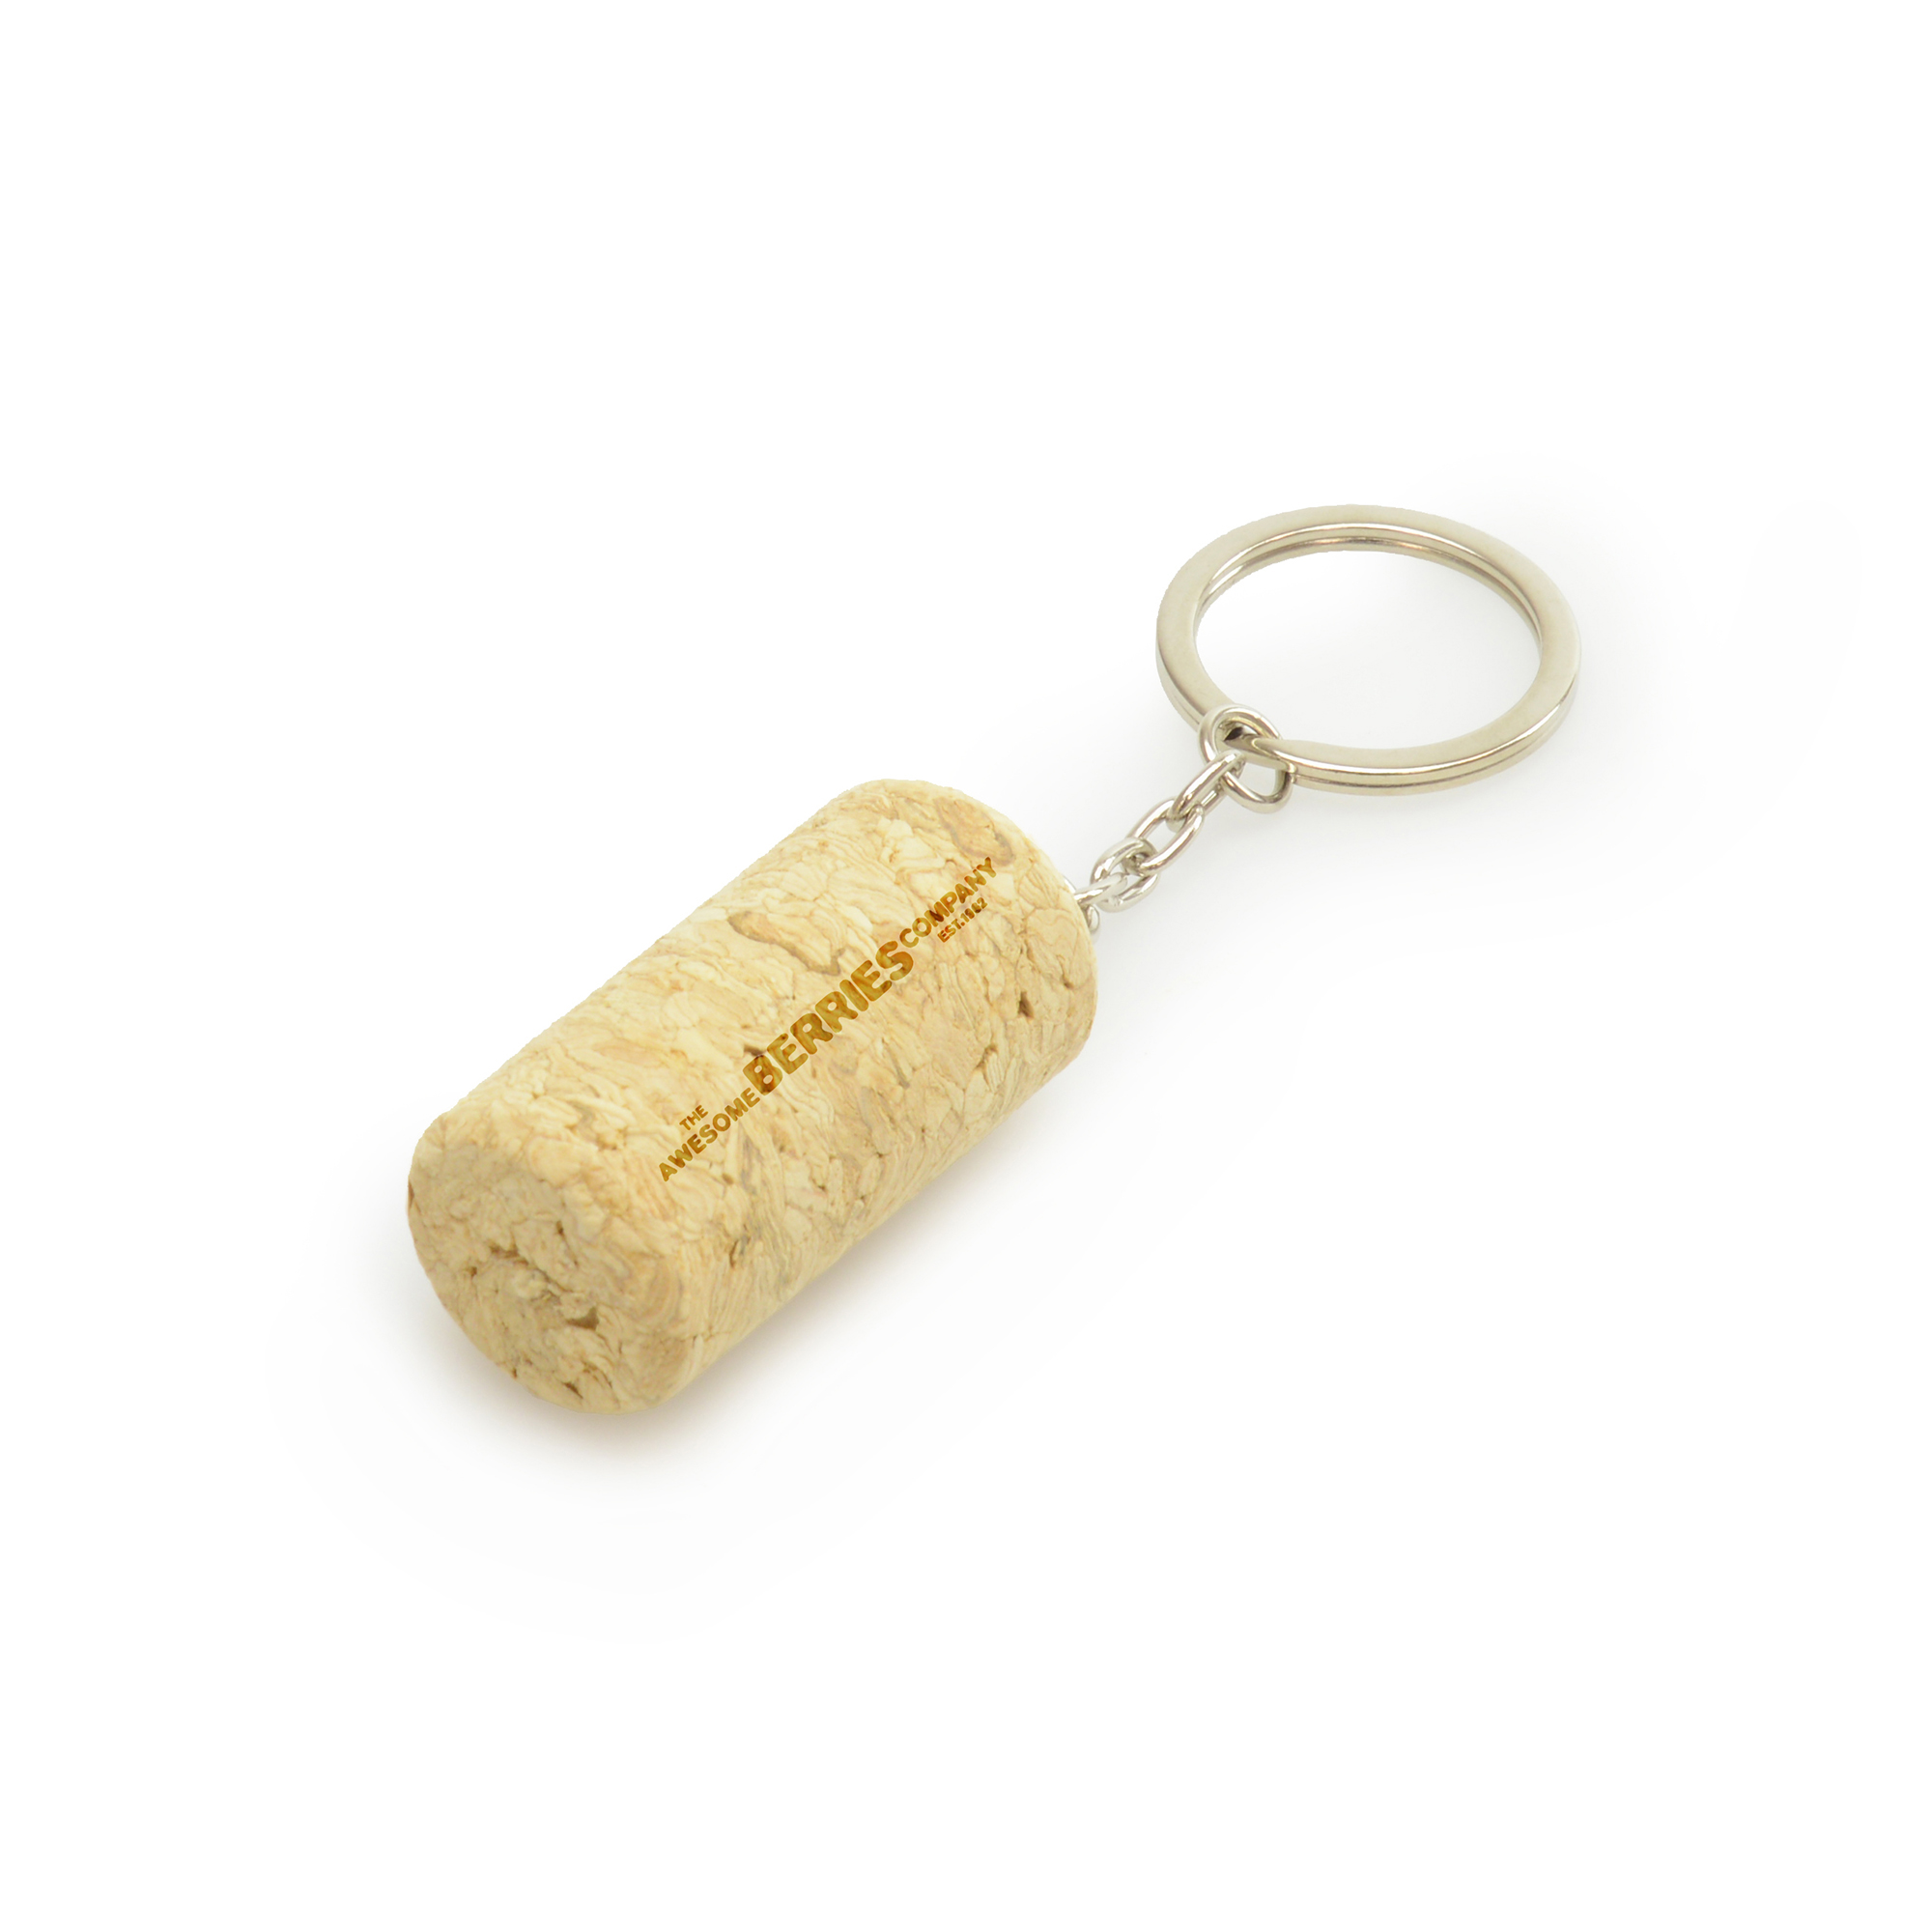 This cylinder cork keyring featuring a metal split keyring it can be easily attached to house or car keys. The cork part of the keyring is fully biodegradable and eco-friendly.